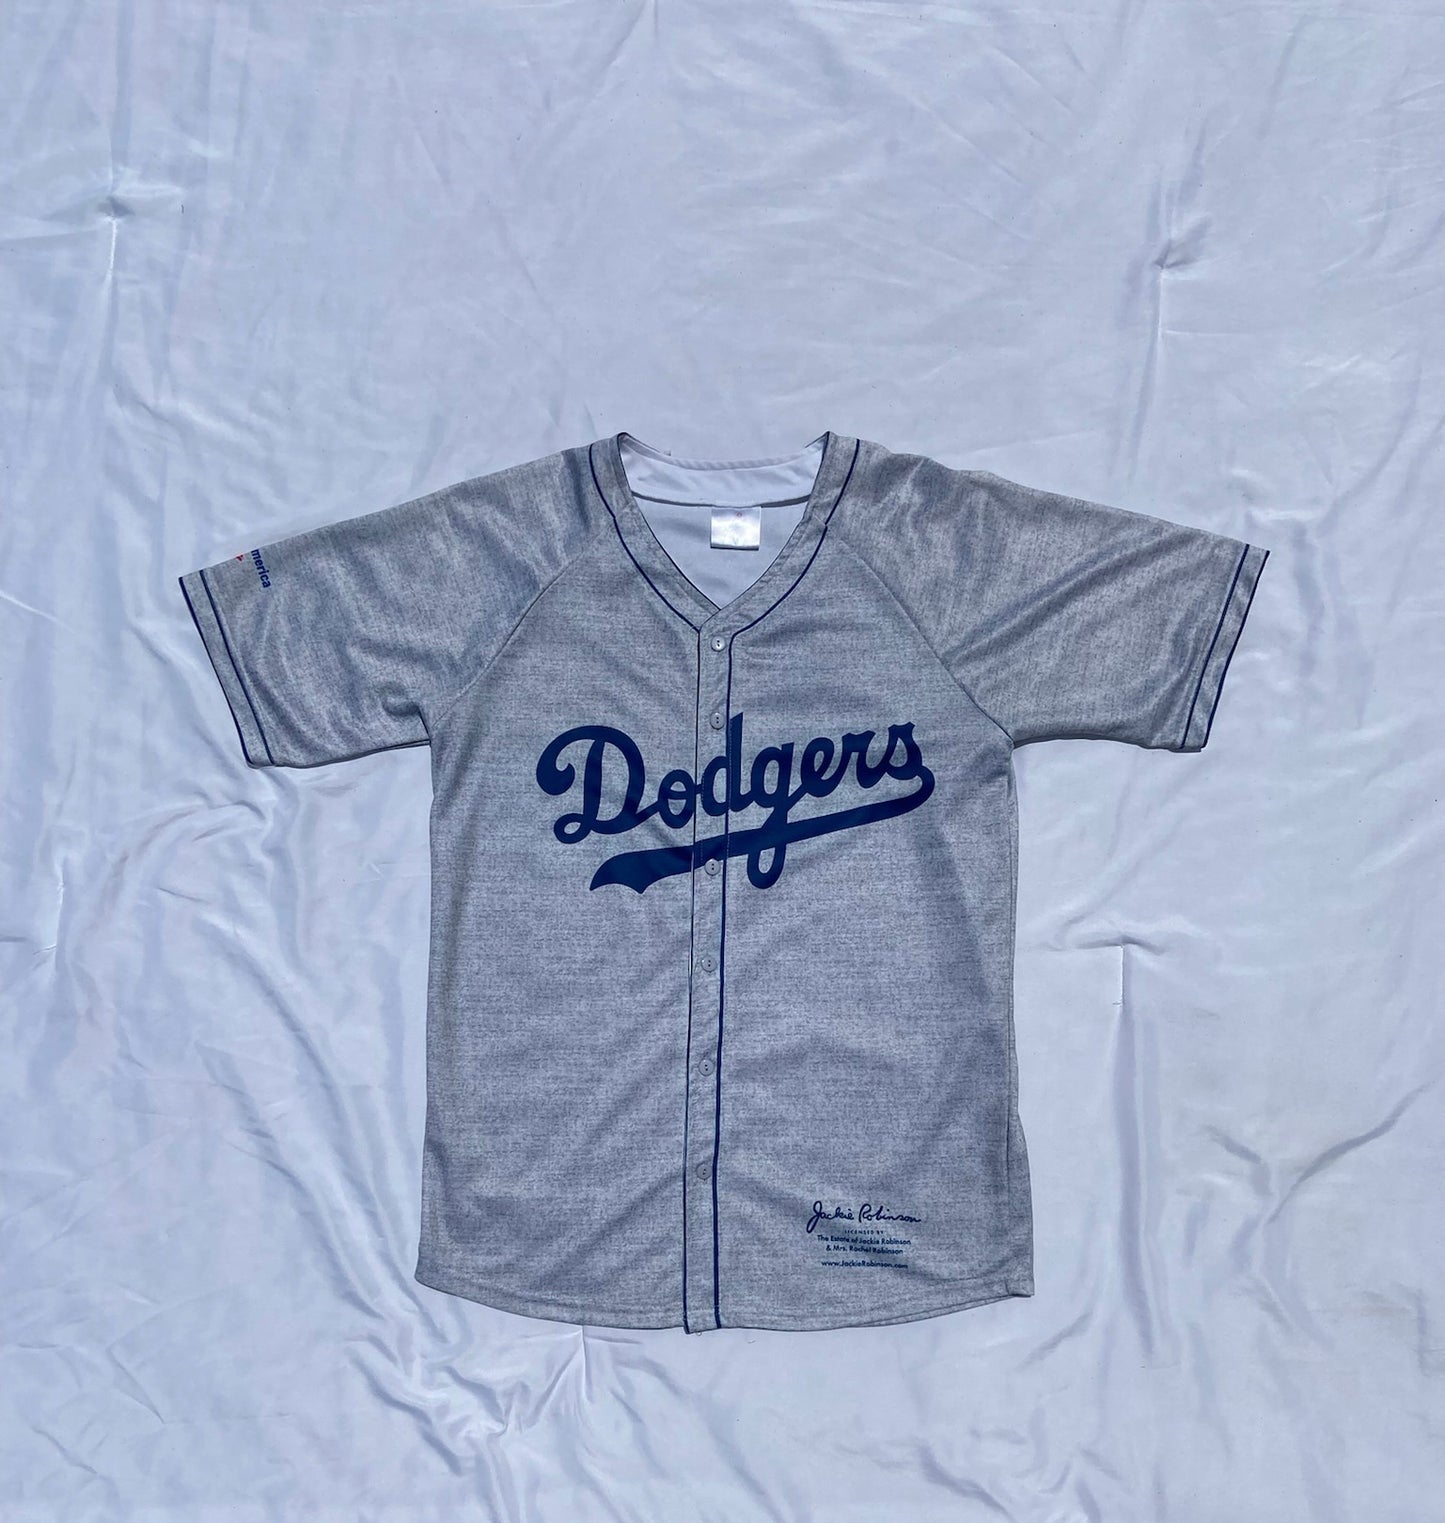 Dodgers #42 Jersey- MTO